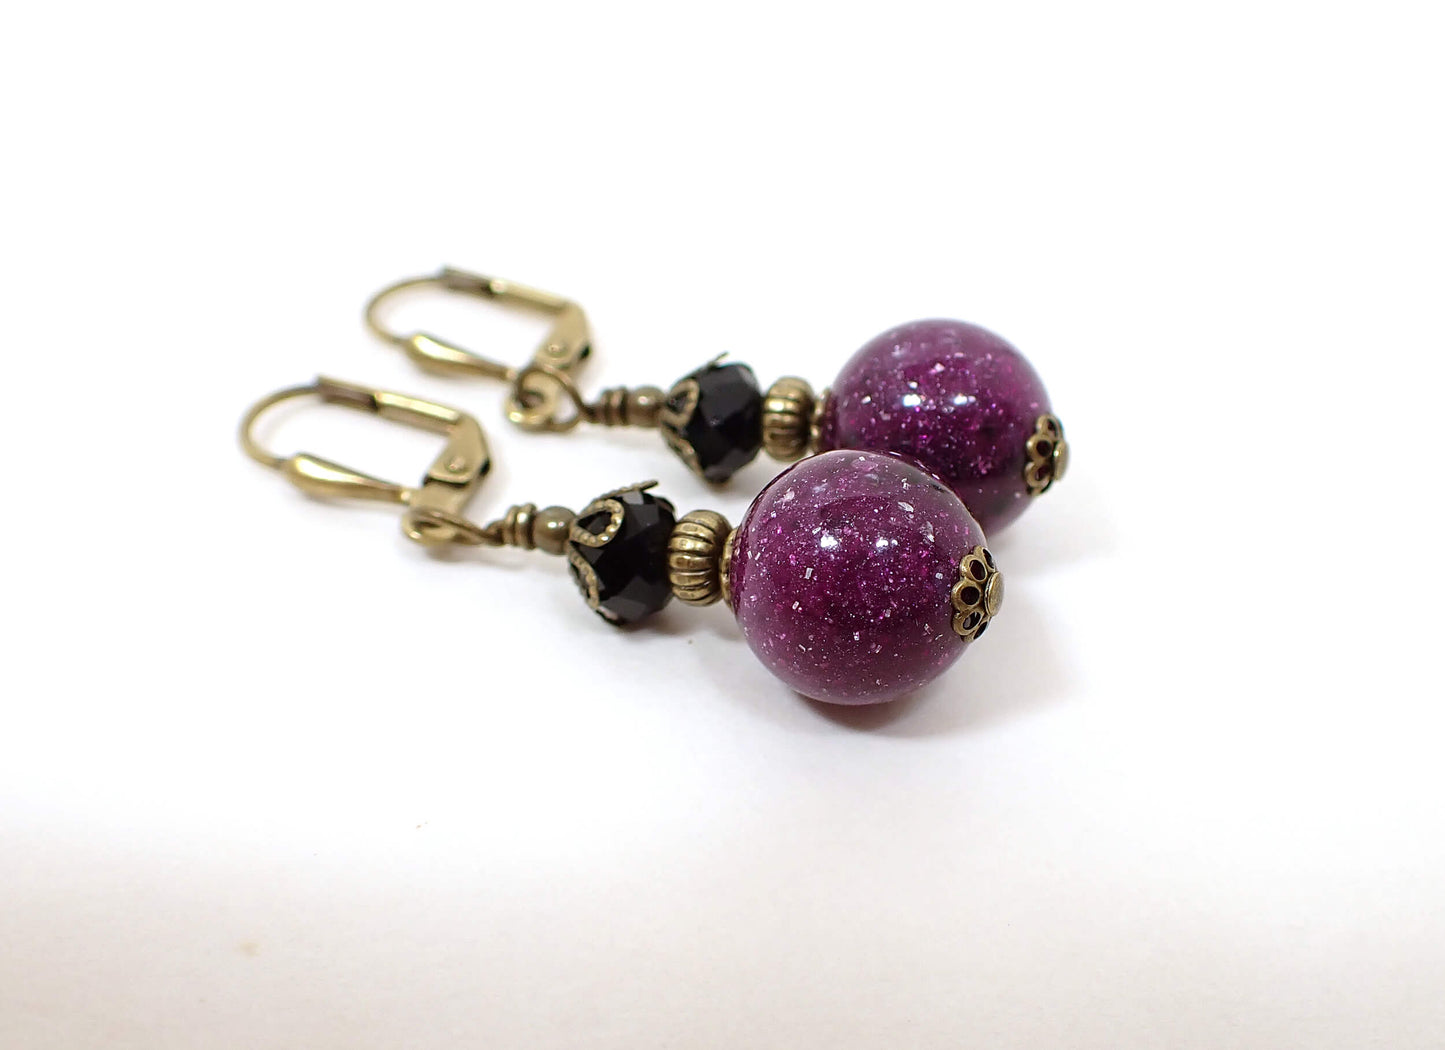 Handmade Sparkly Purple Lucite and Black Galaxy Earrings with Antiqued Brass Hook Lever Back or Clip On